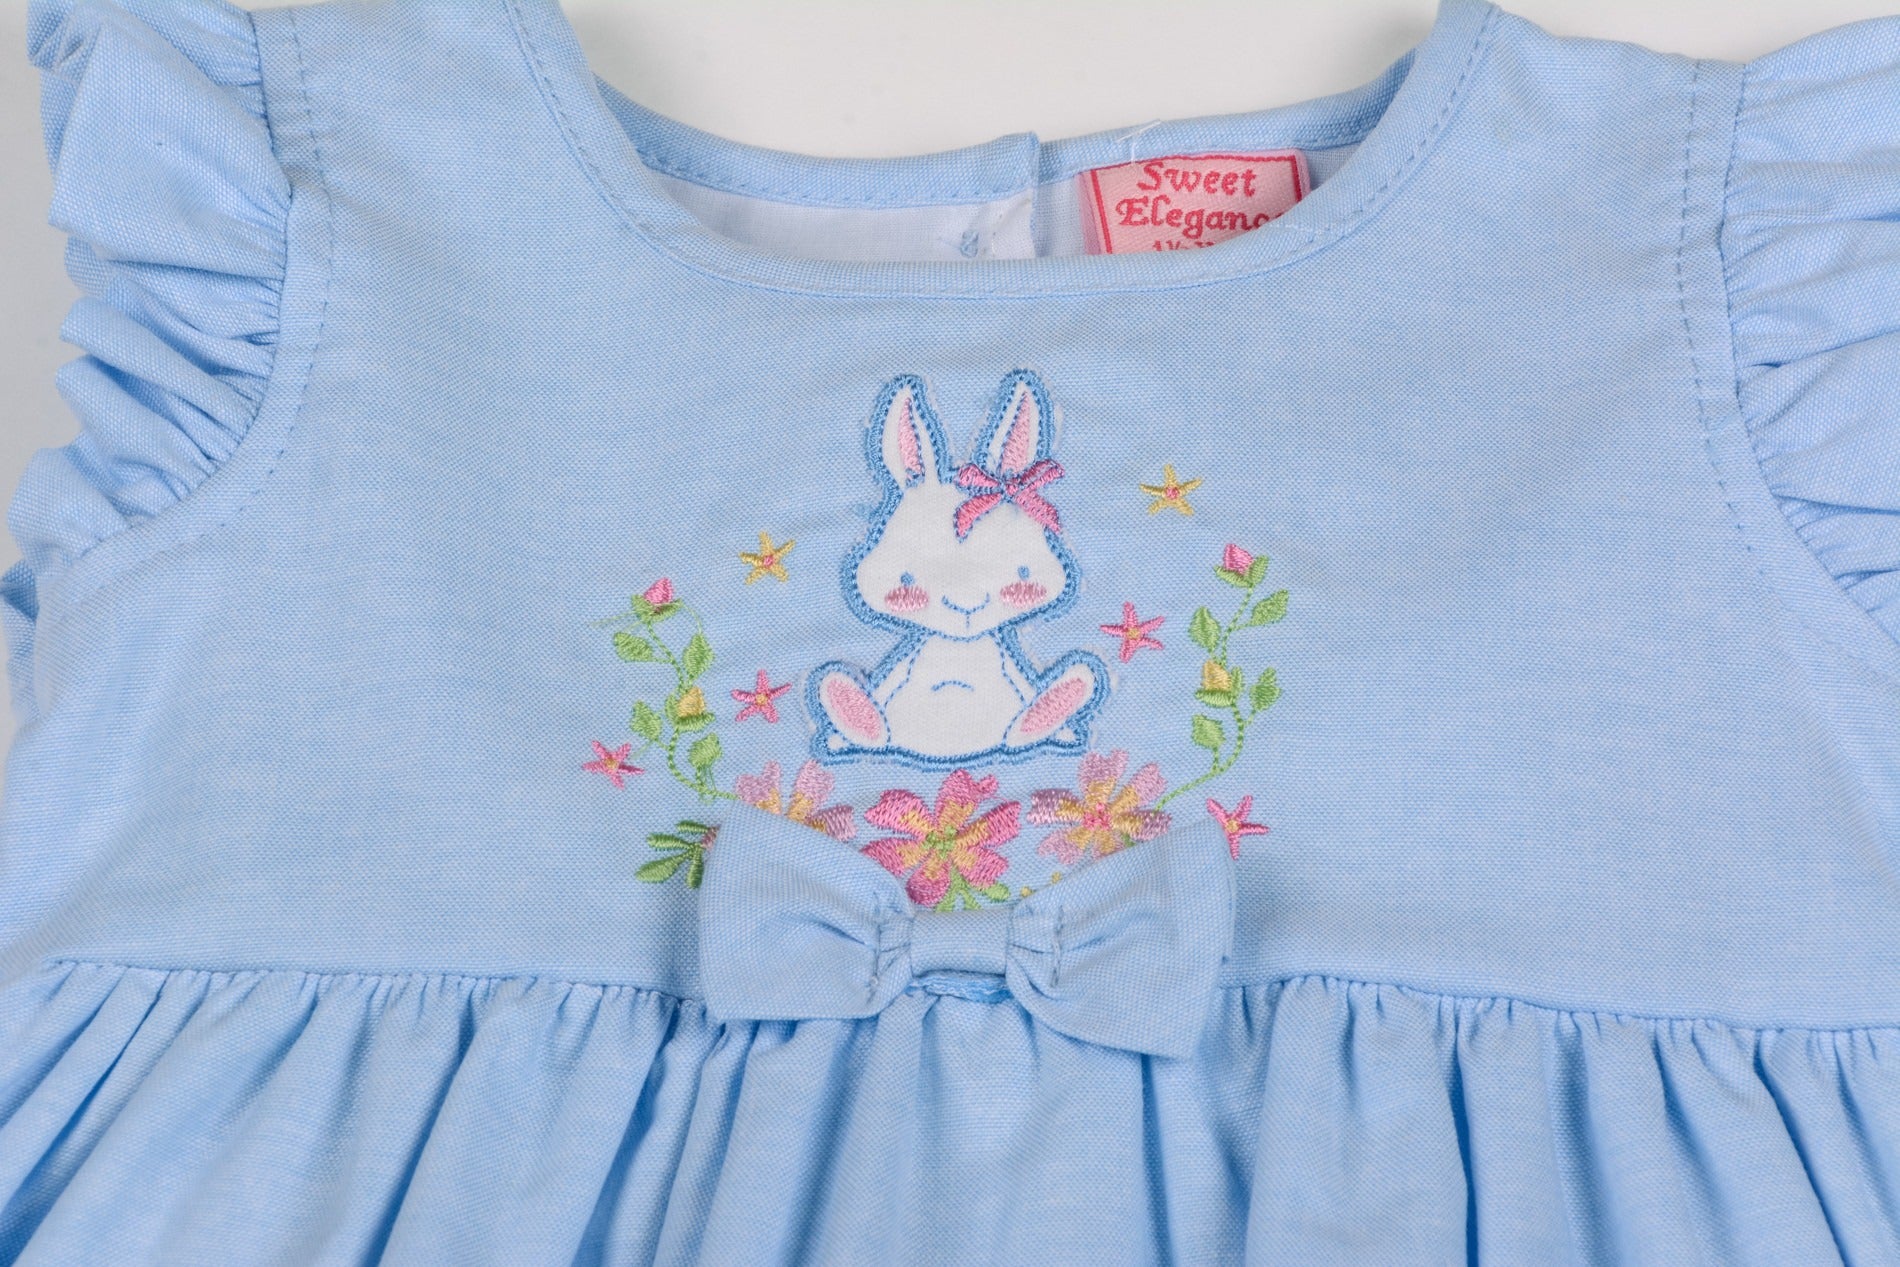 View Sweet Elegance Chambray Lined Bunny Dress with Pant and Headband 12 Years information